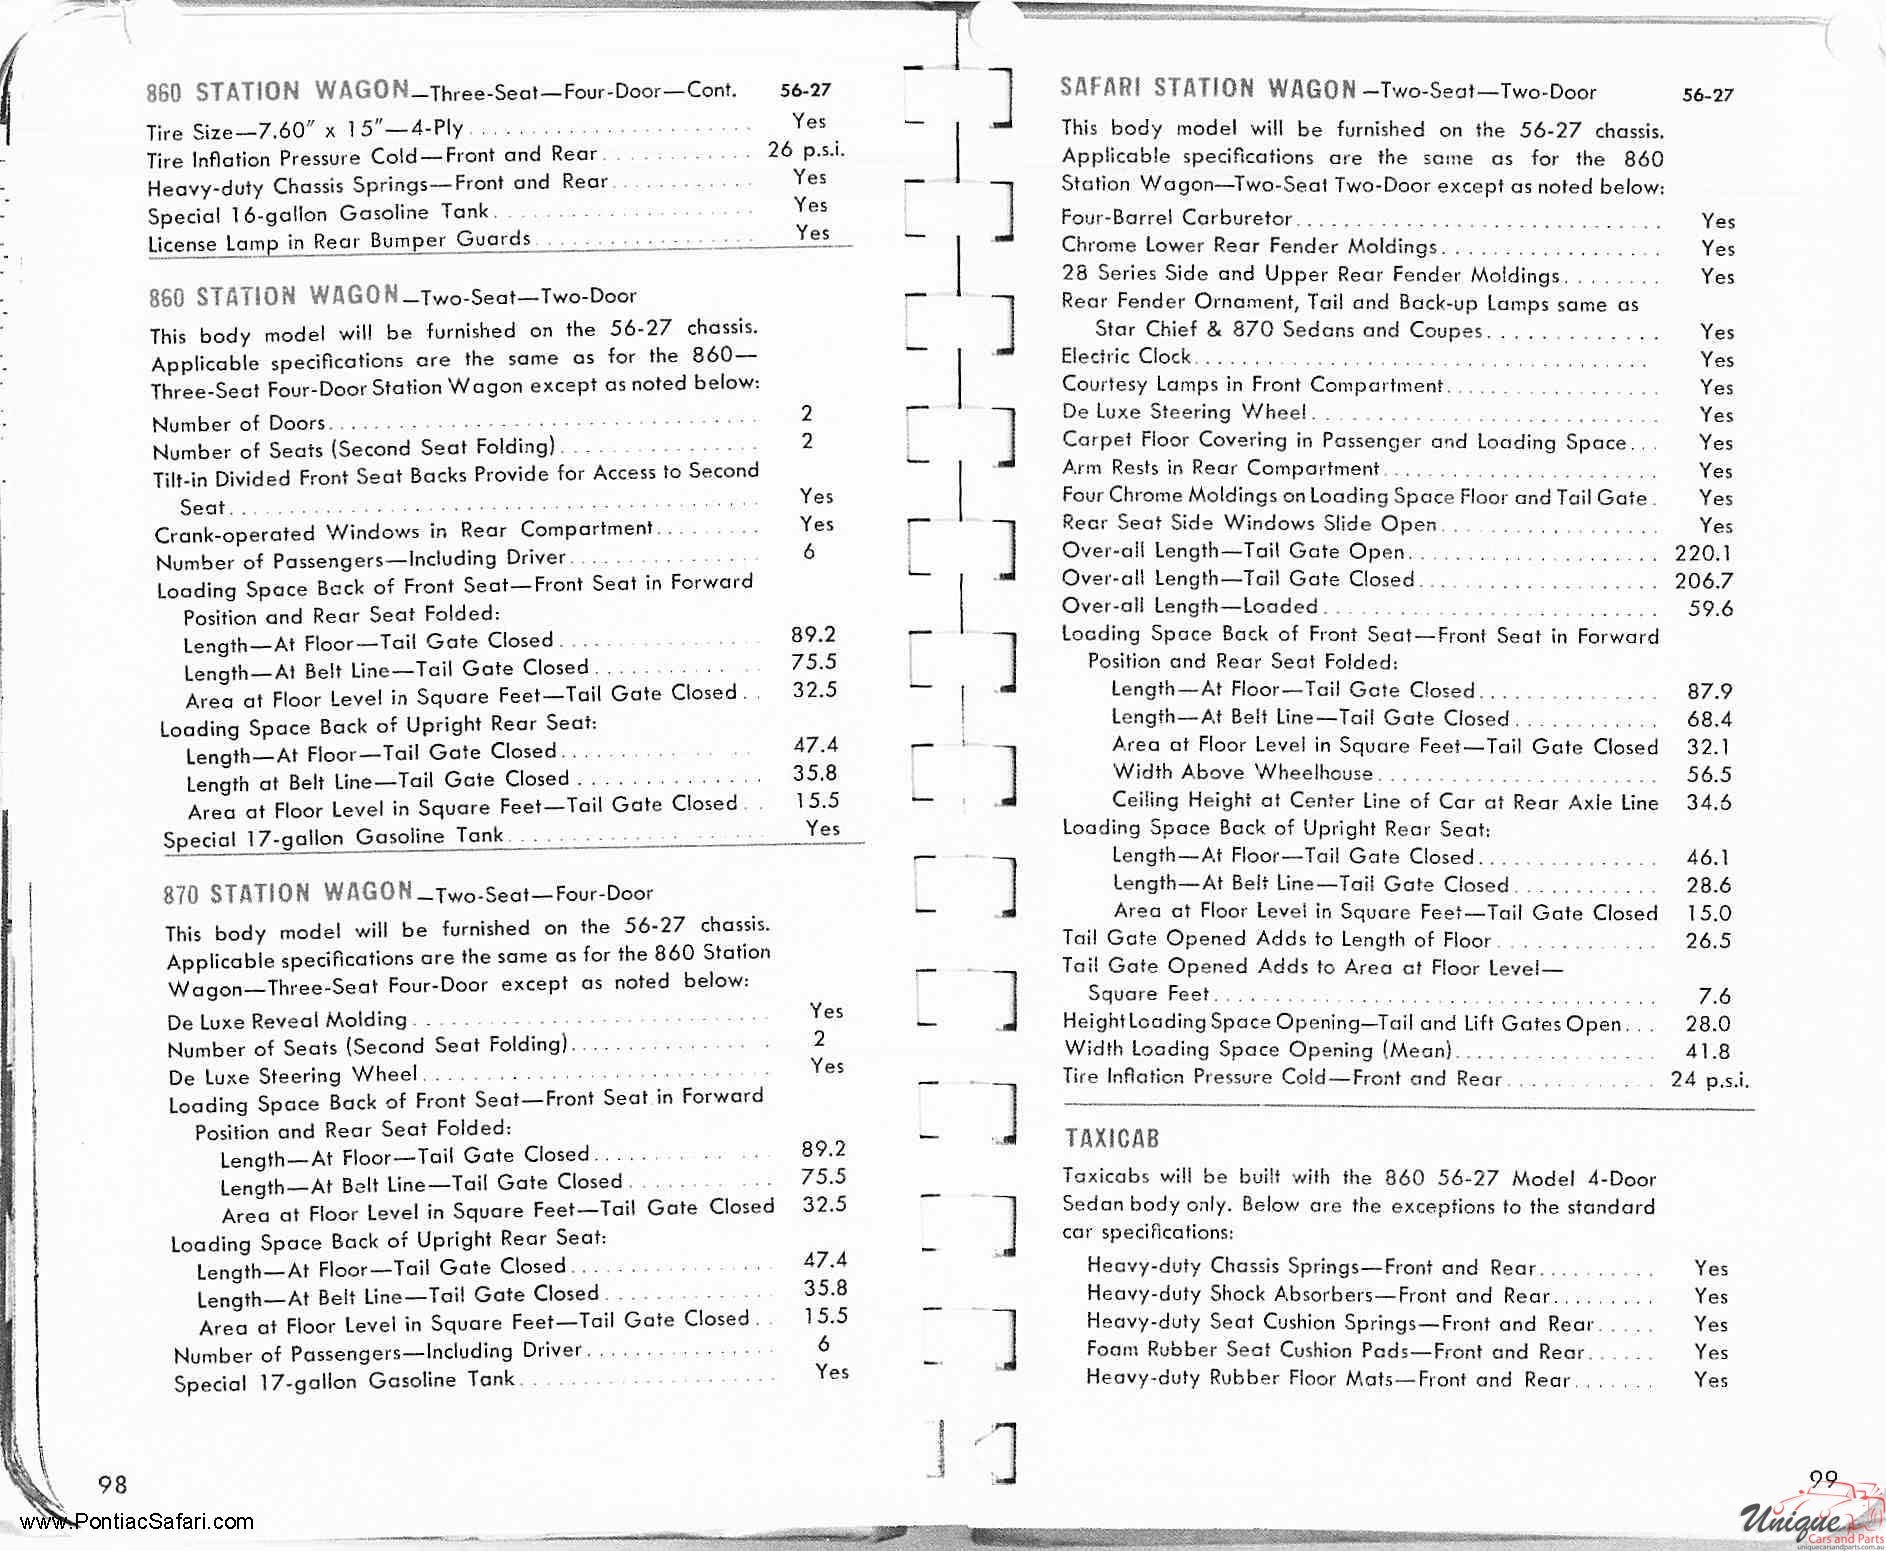 1956 Pontiac Facts Book Page 95